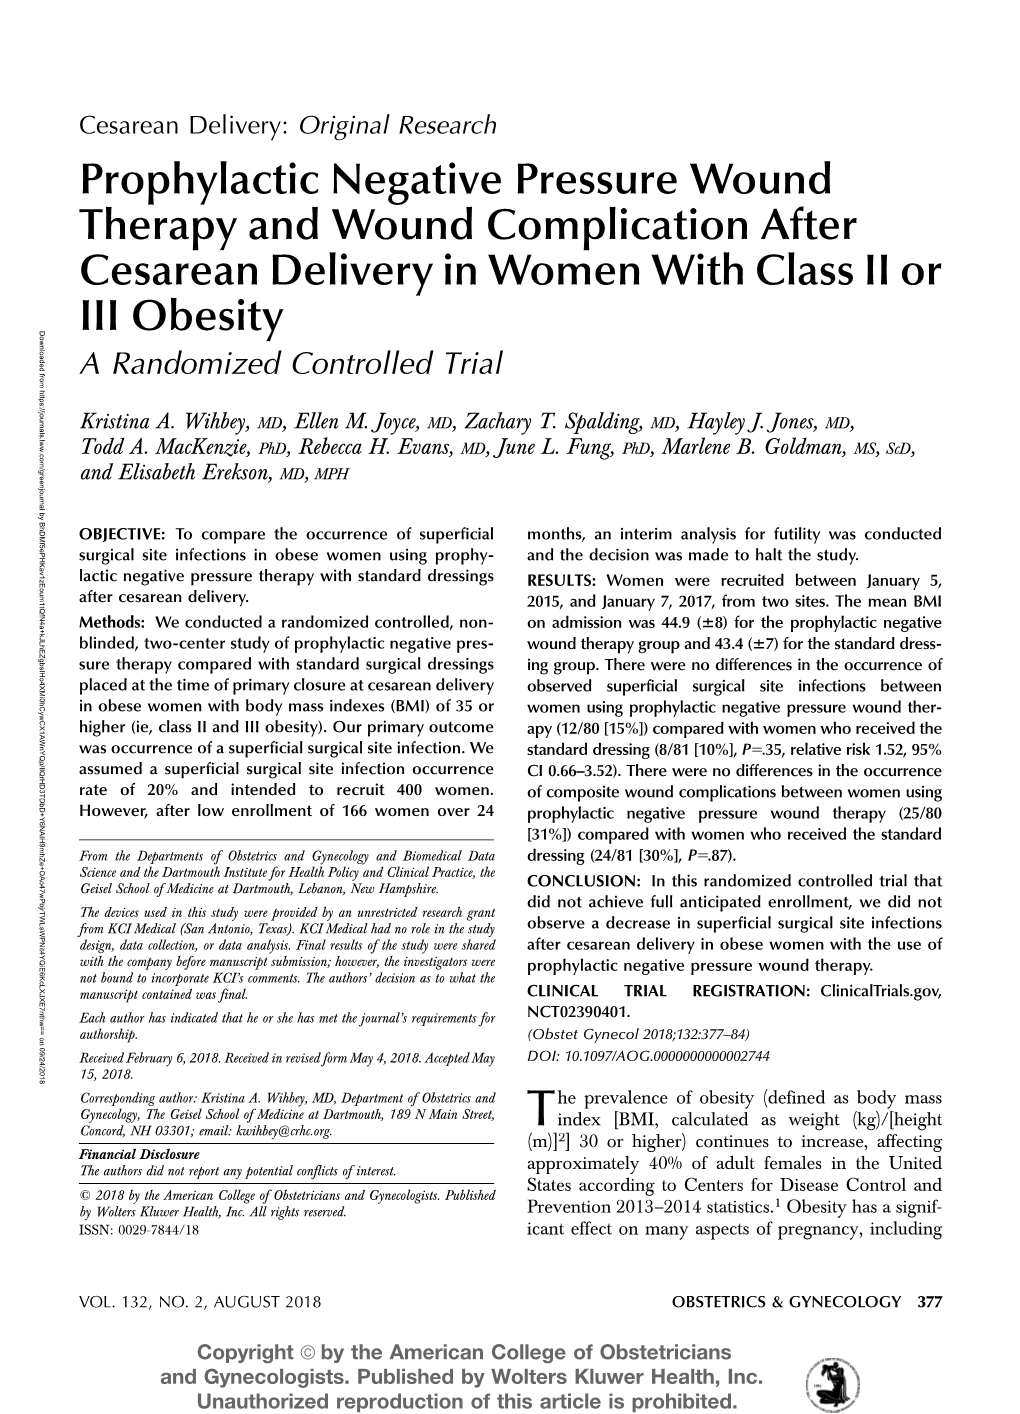 Prophylactic Negative Pressure Wound Therapy and Wound Complication After Cesarean Delivery in Women with Class II Or III Obesit